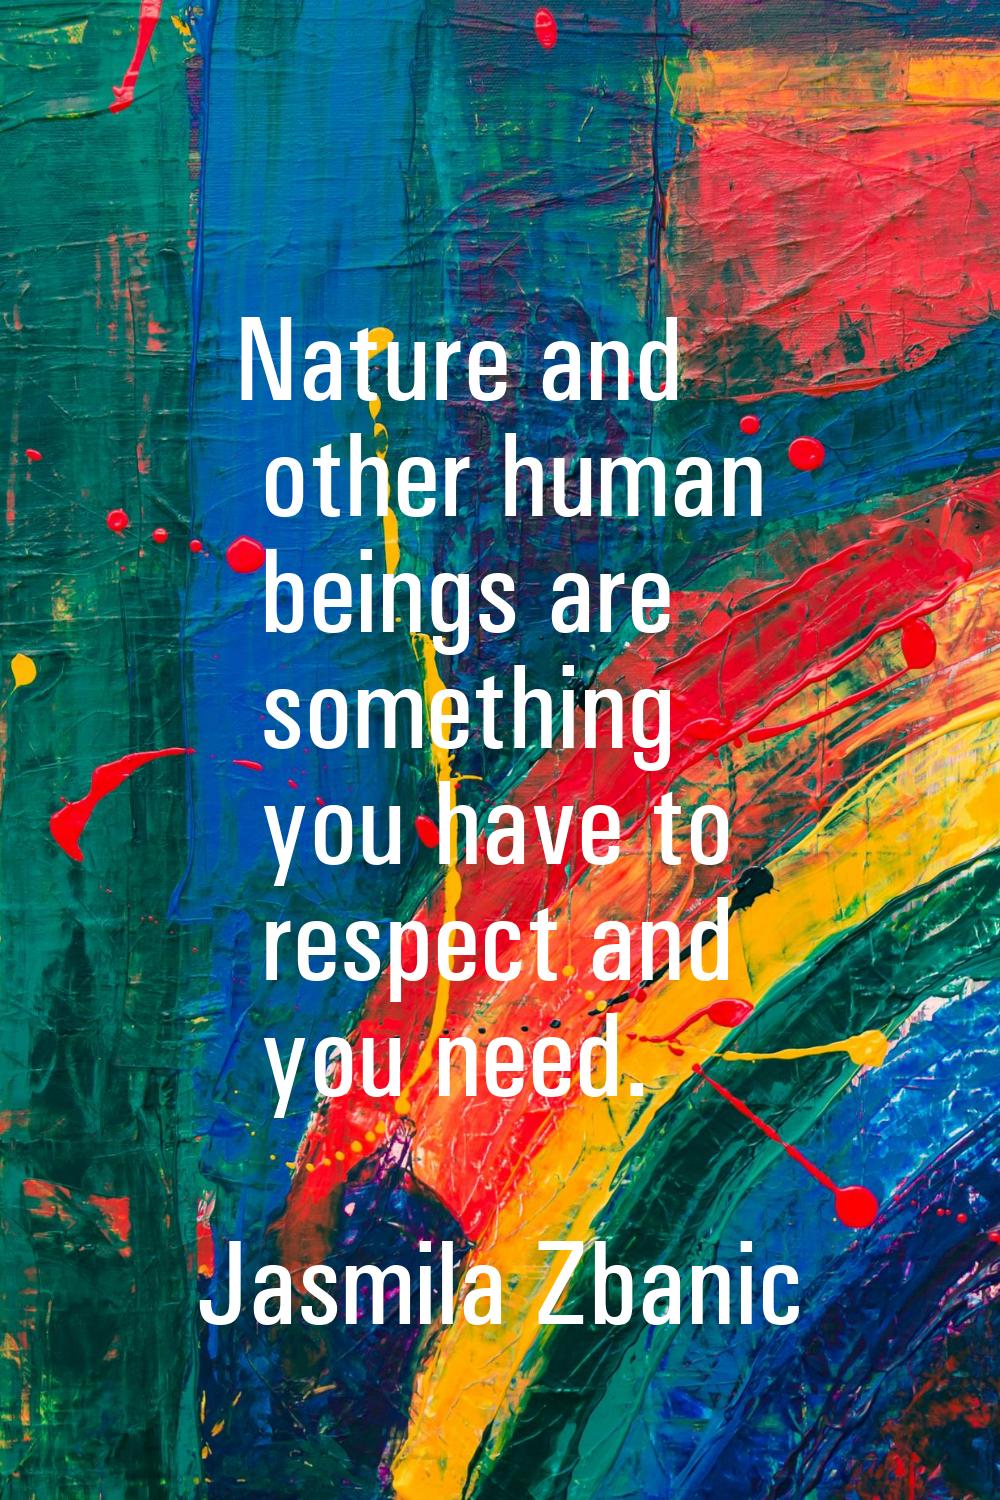 Nature and other human beings are something you have to respect and you need.